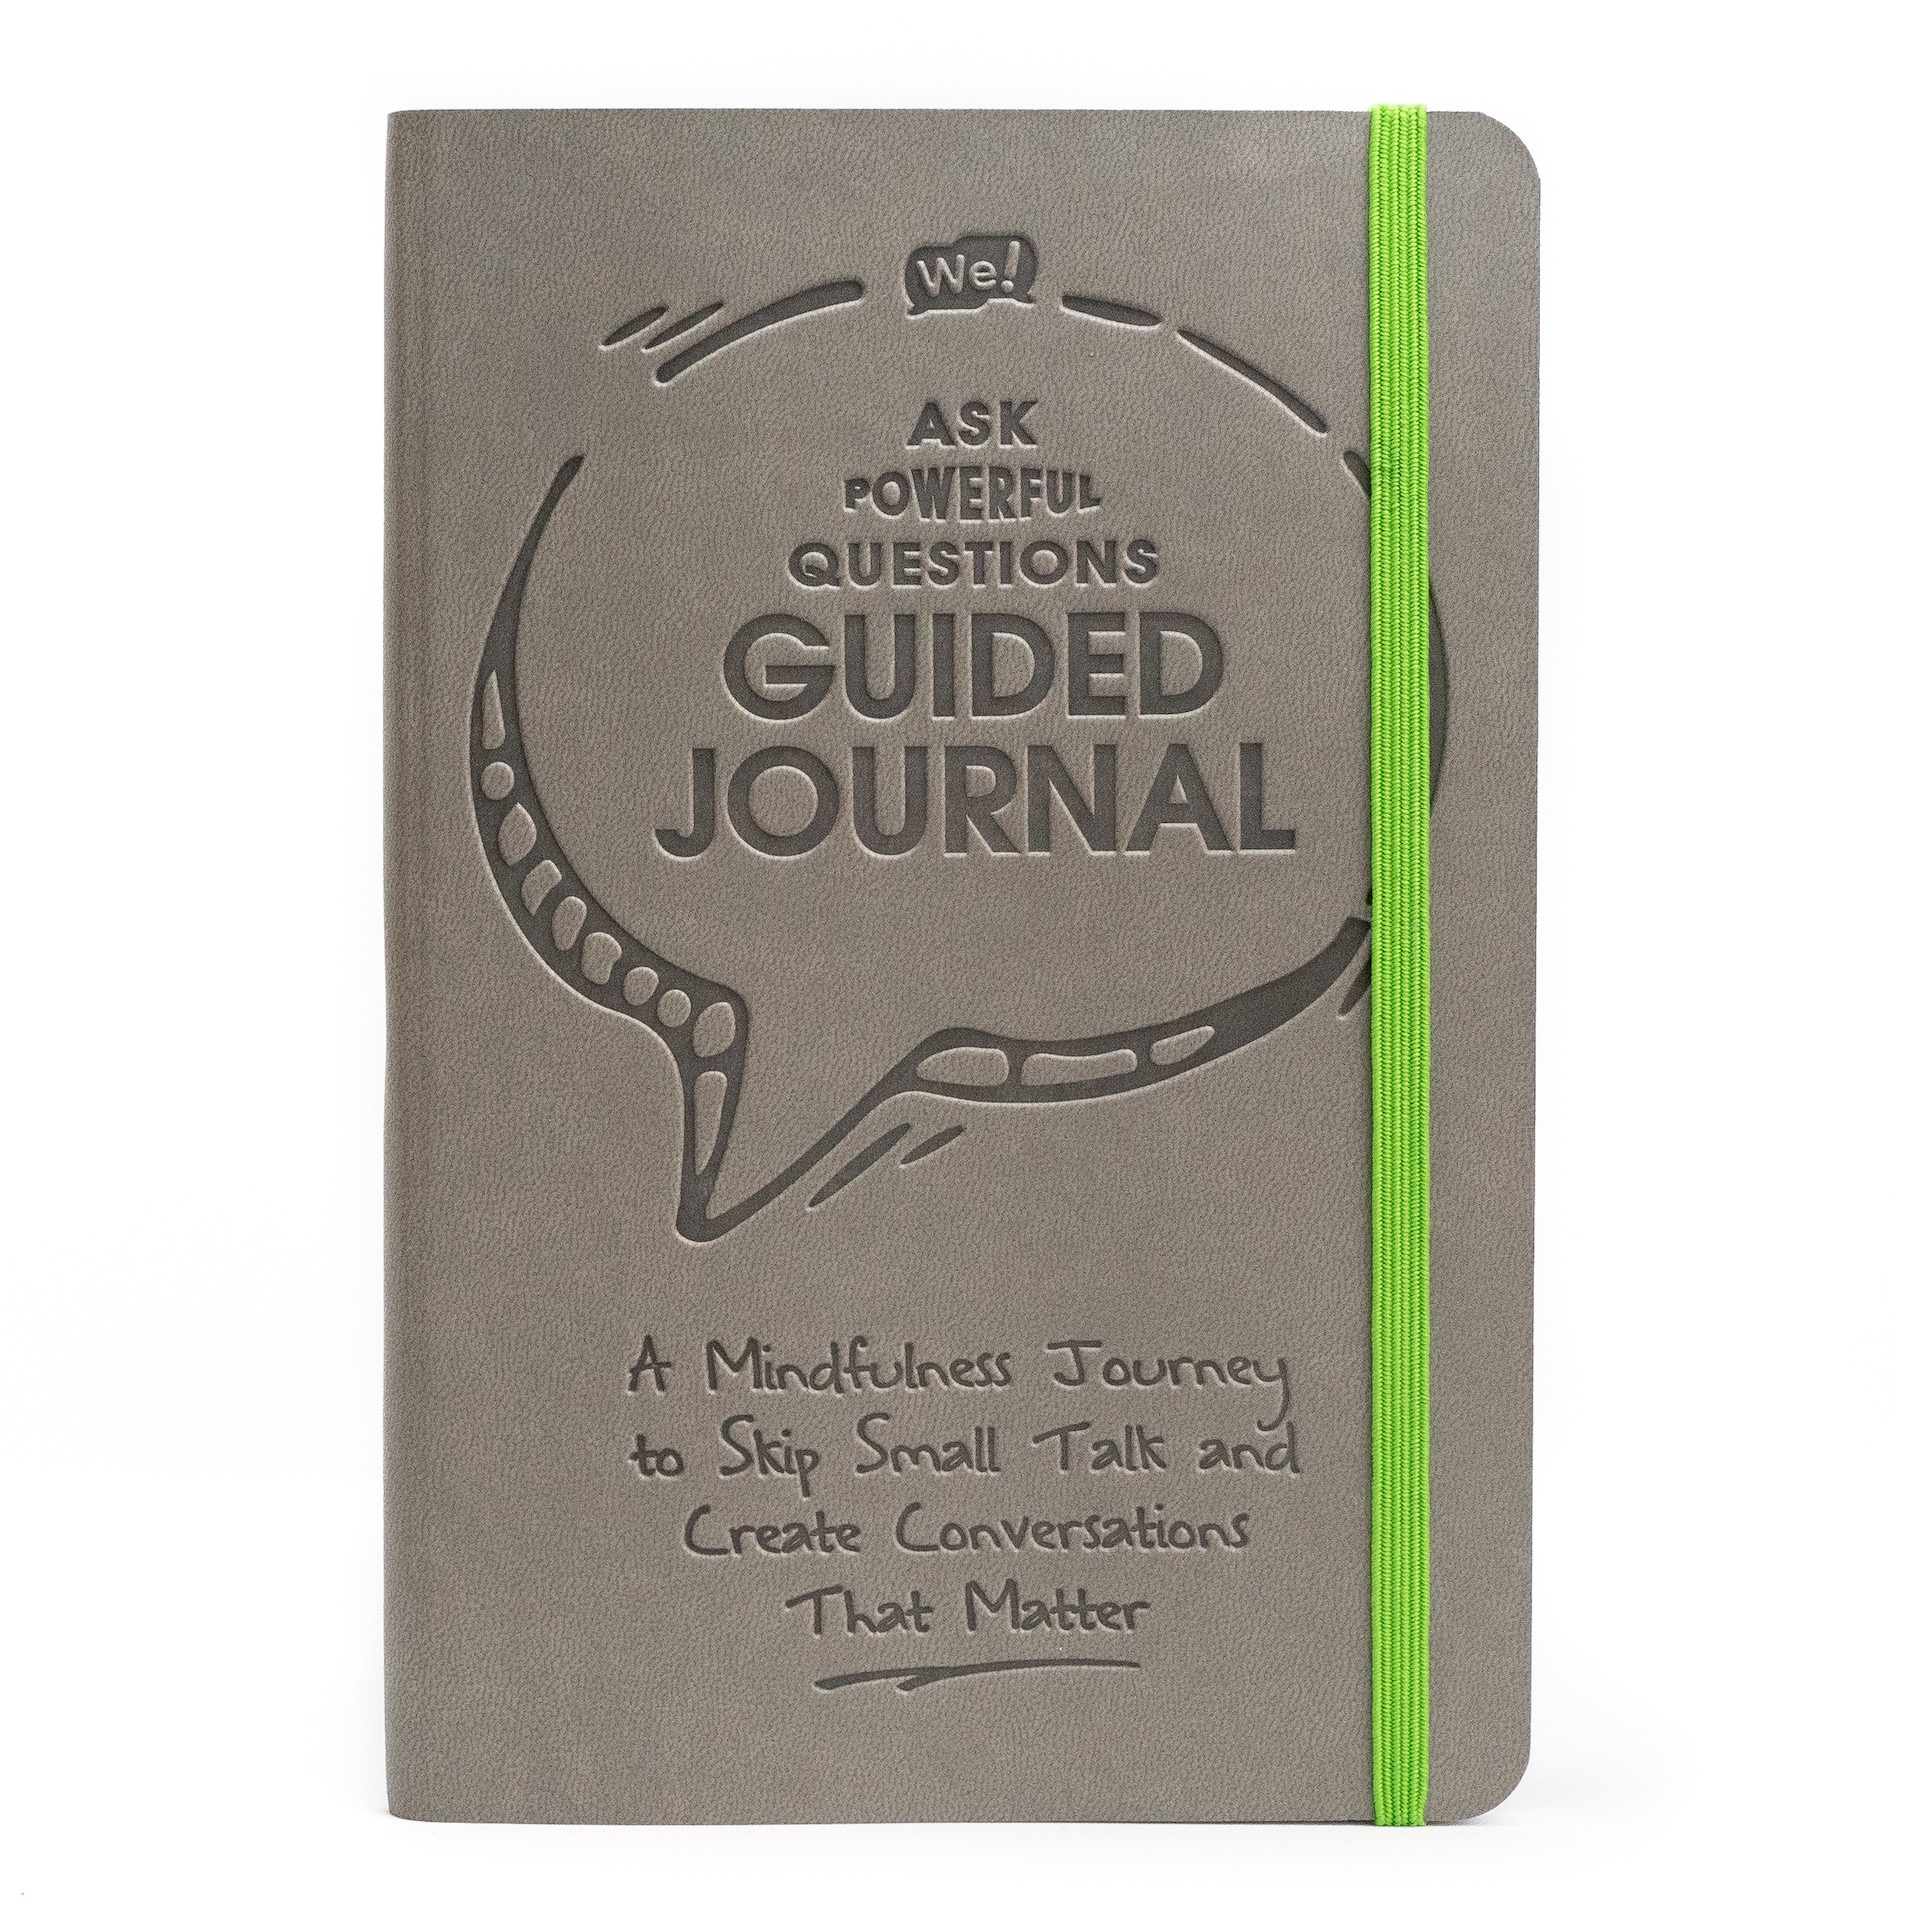 Guided Journal to Ask Powerful Questions